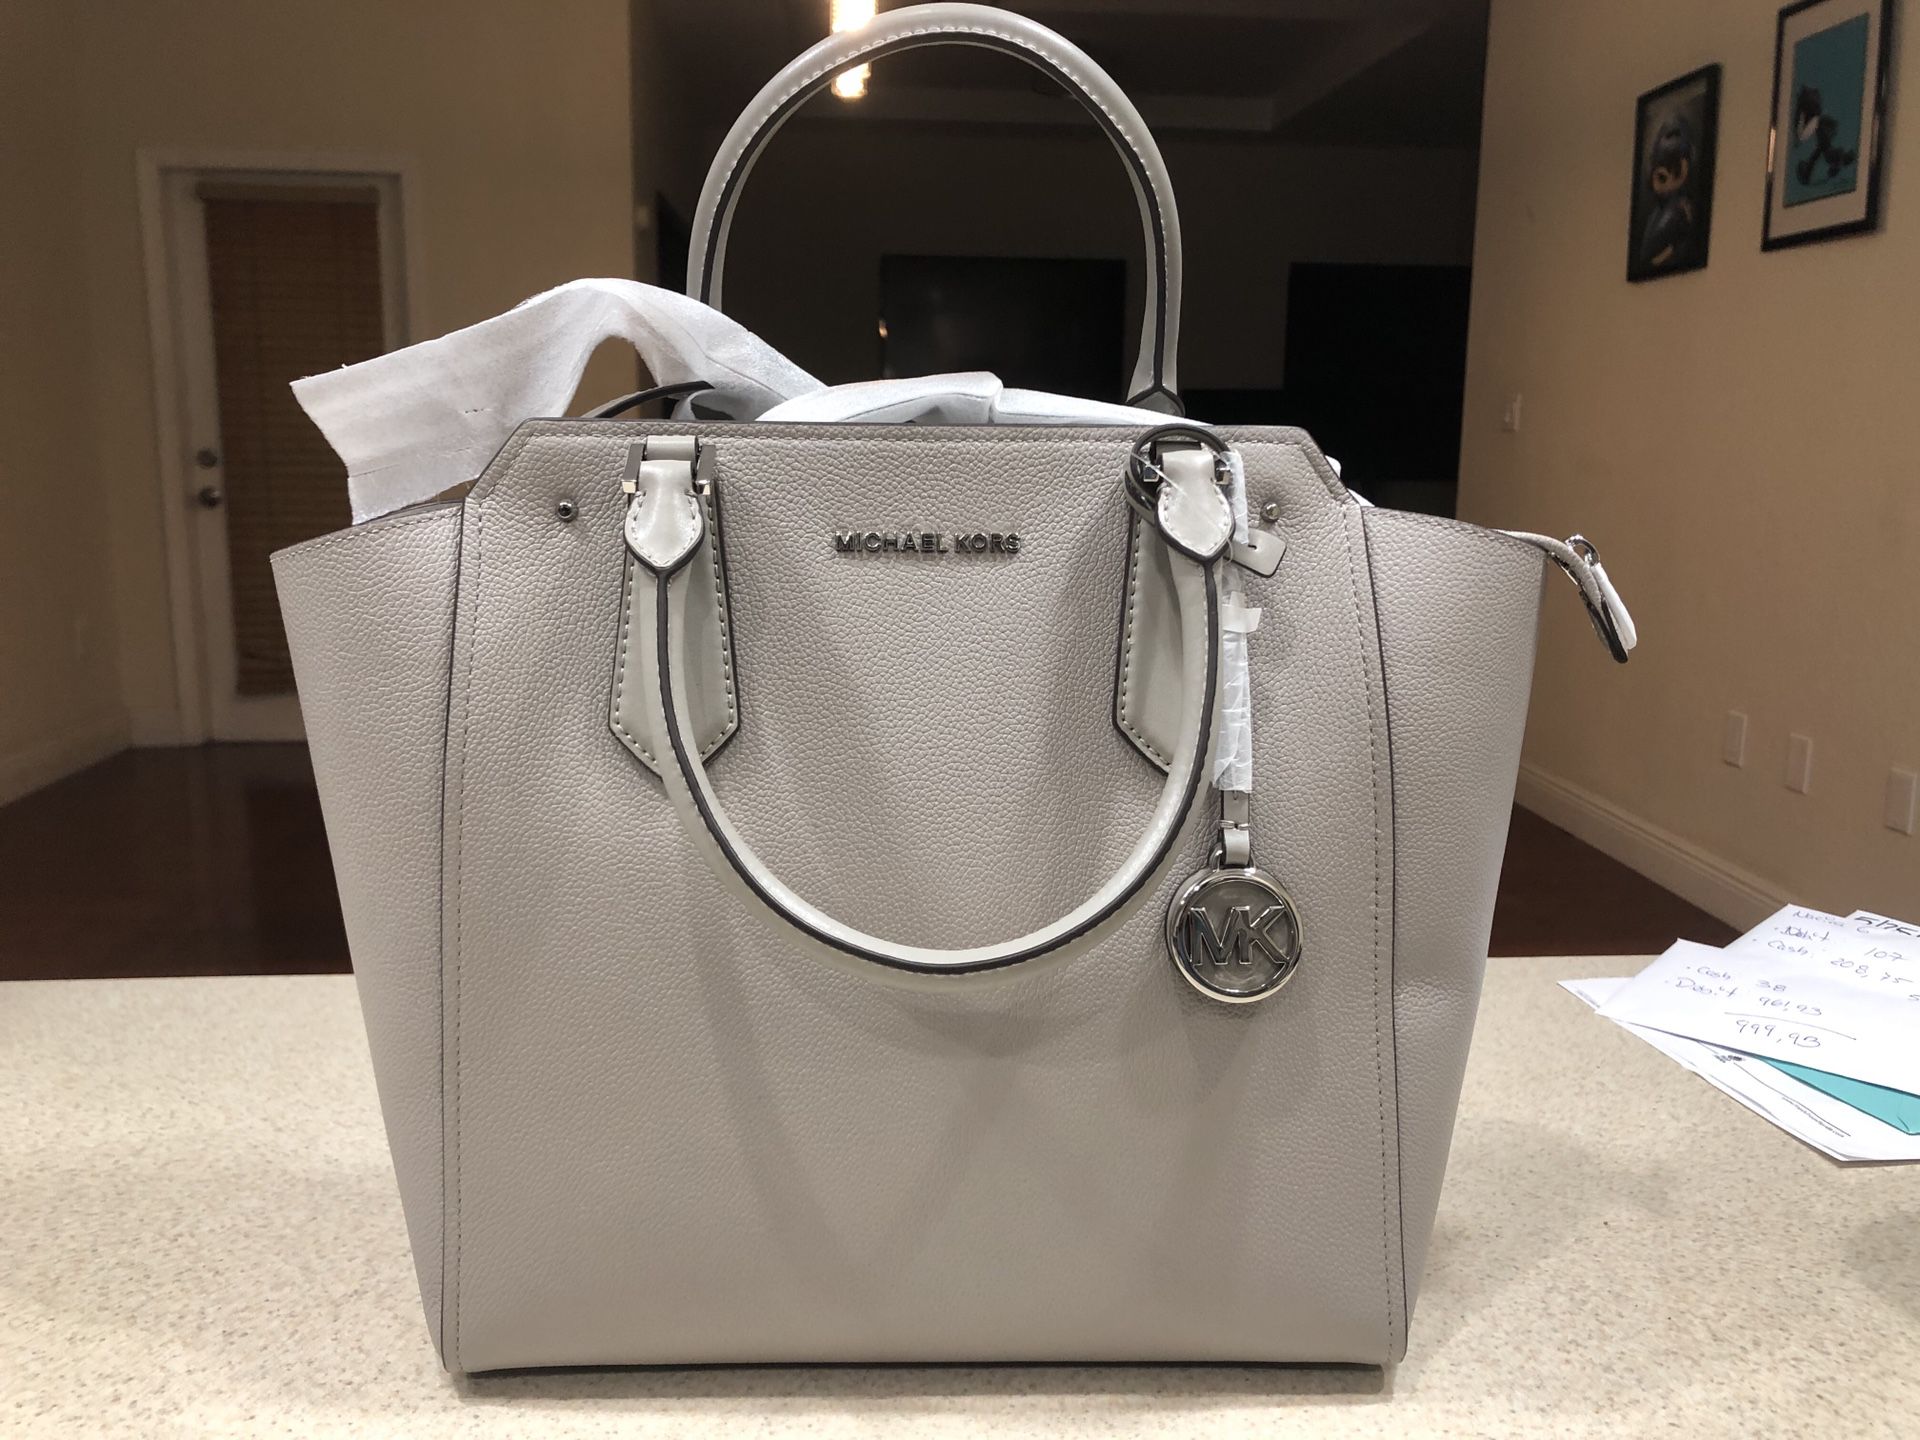 MK MICHAEL KORS LG N/S TOTE ORIGINAL LEATHER GRAY BEAUTY!!! MSRP $328 !!!!! FREE DELIVERY OR SHIPPING